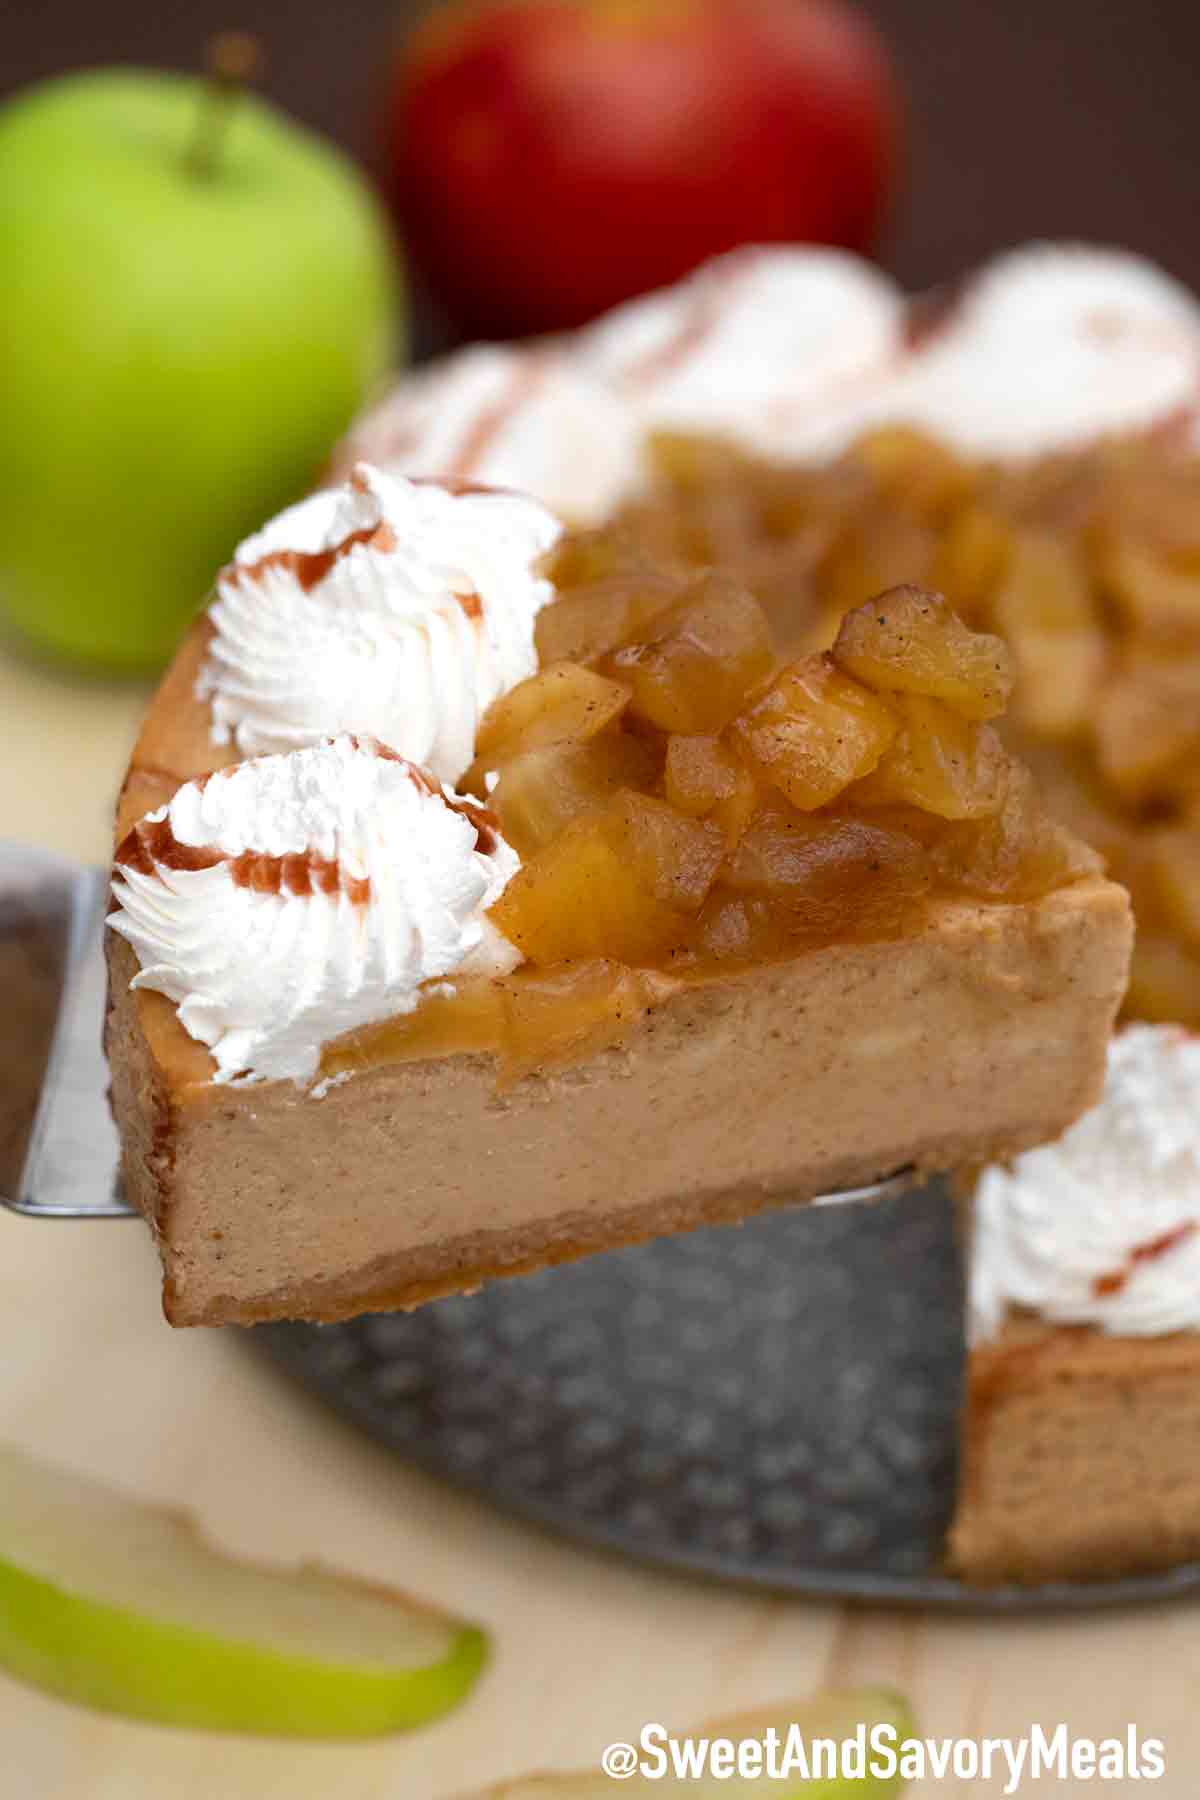 Caramel Apple Cheesecake Recipe - Sweet and Savory Meals